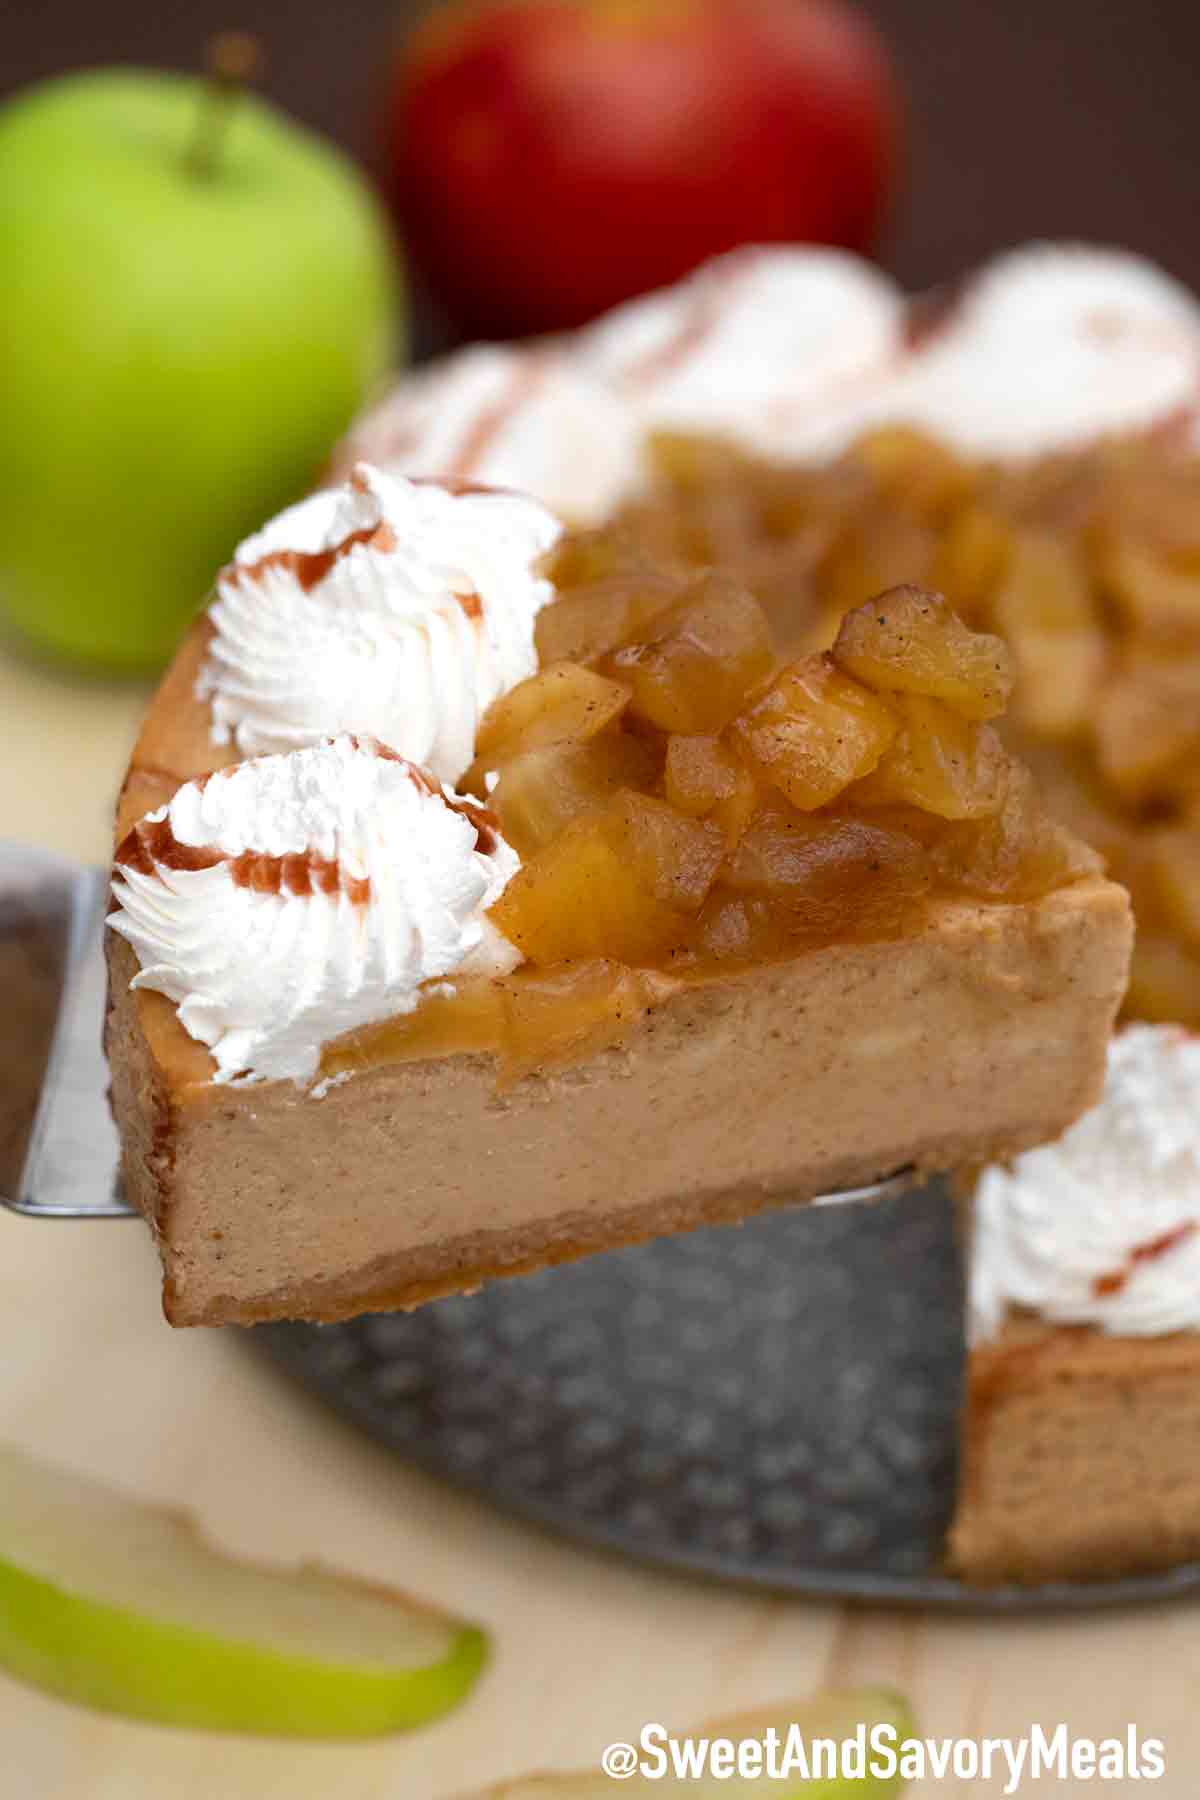 Caramel Apple Cheesecake Recipe - Sweet and Savory Meals